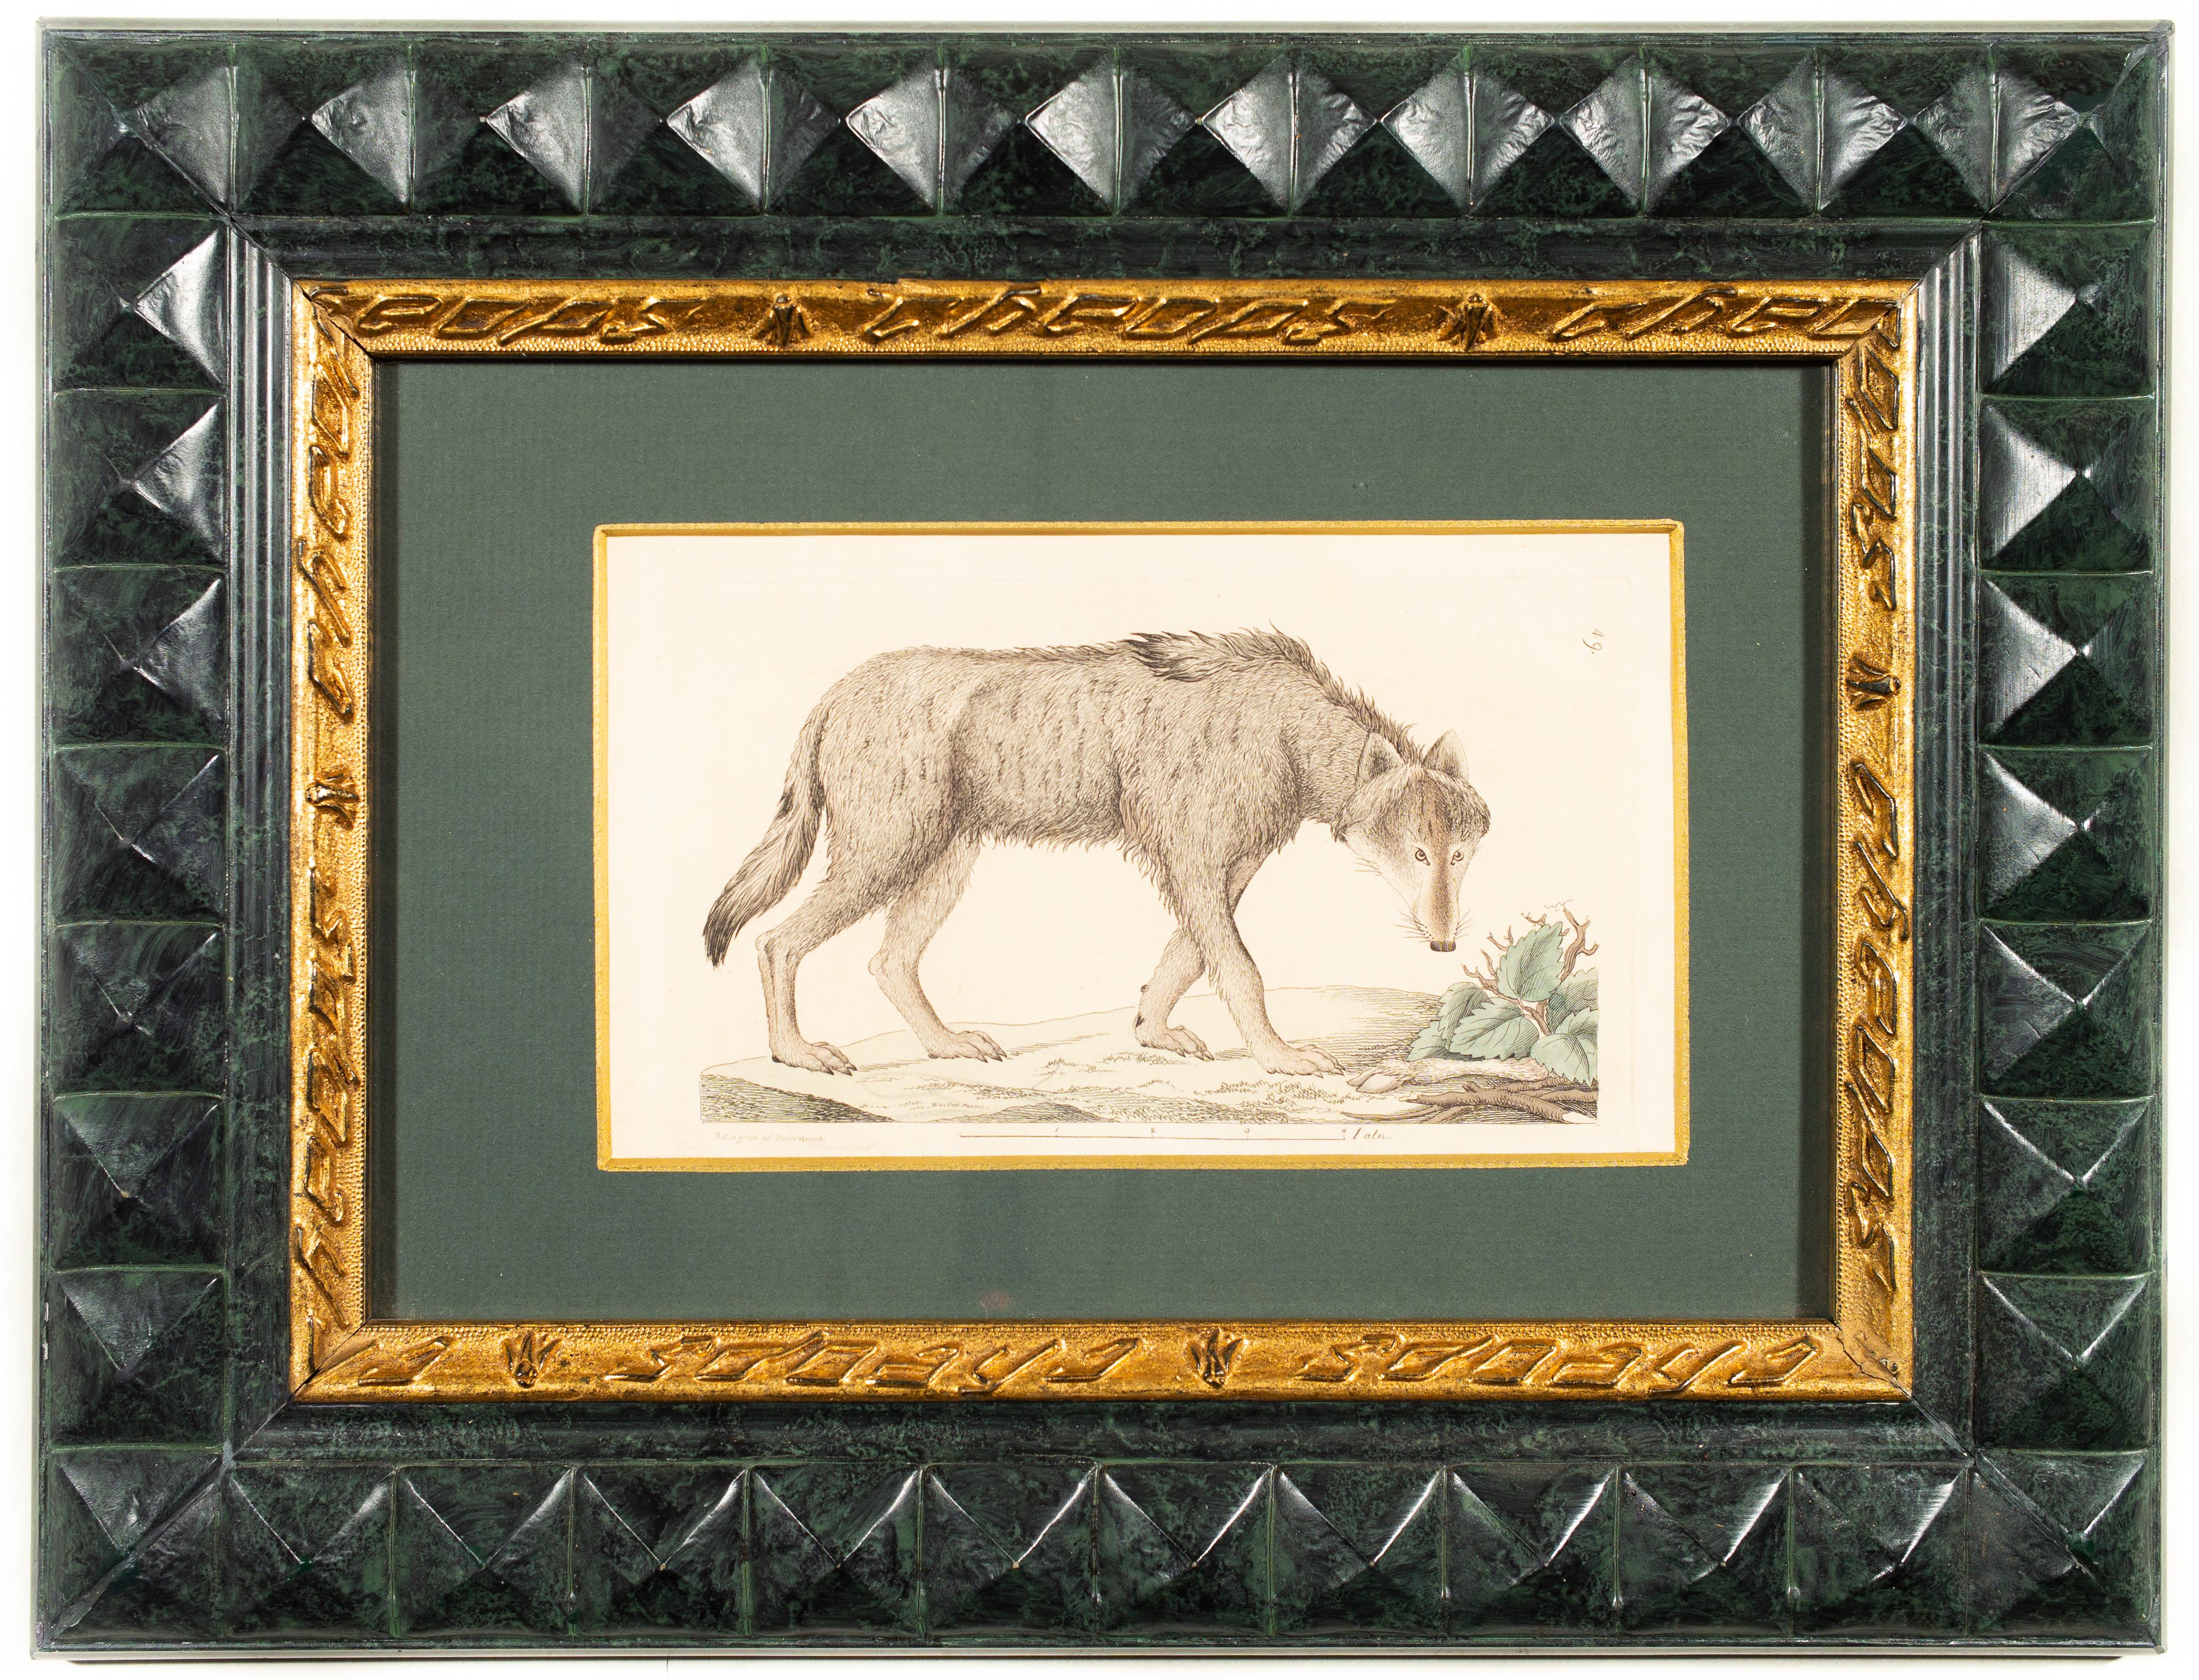 A Wolf, Hand-Colored Print From The Early 1800s by Johan Wilhelm Palmstruch